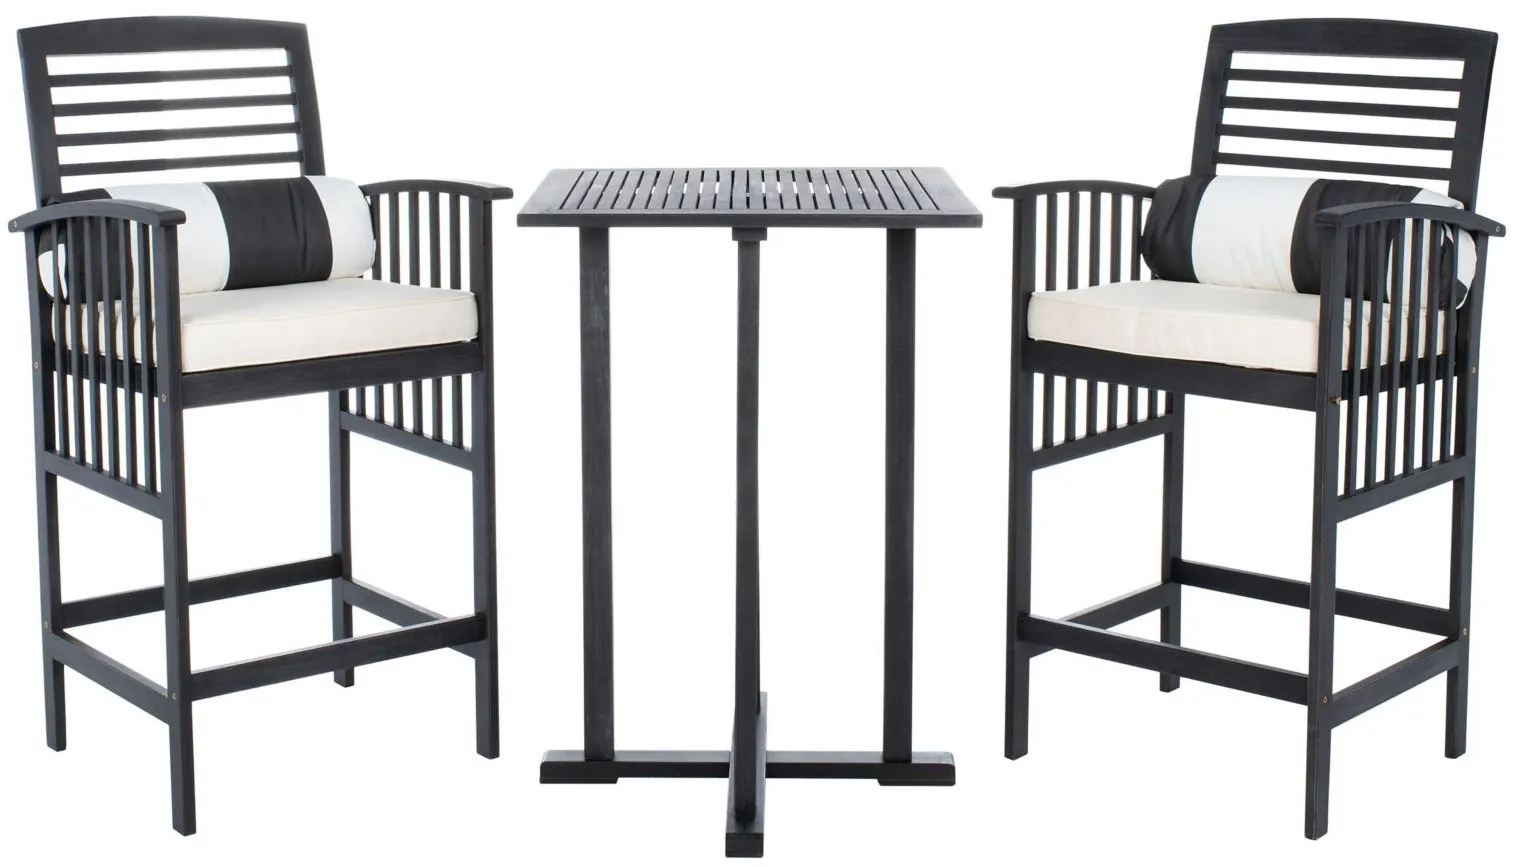 Davies 3-pc. Outdoor Pub Table Set in Pacific Blue by Safavieh